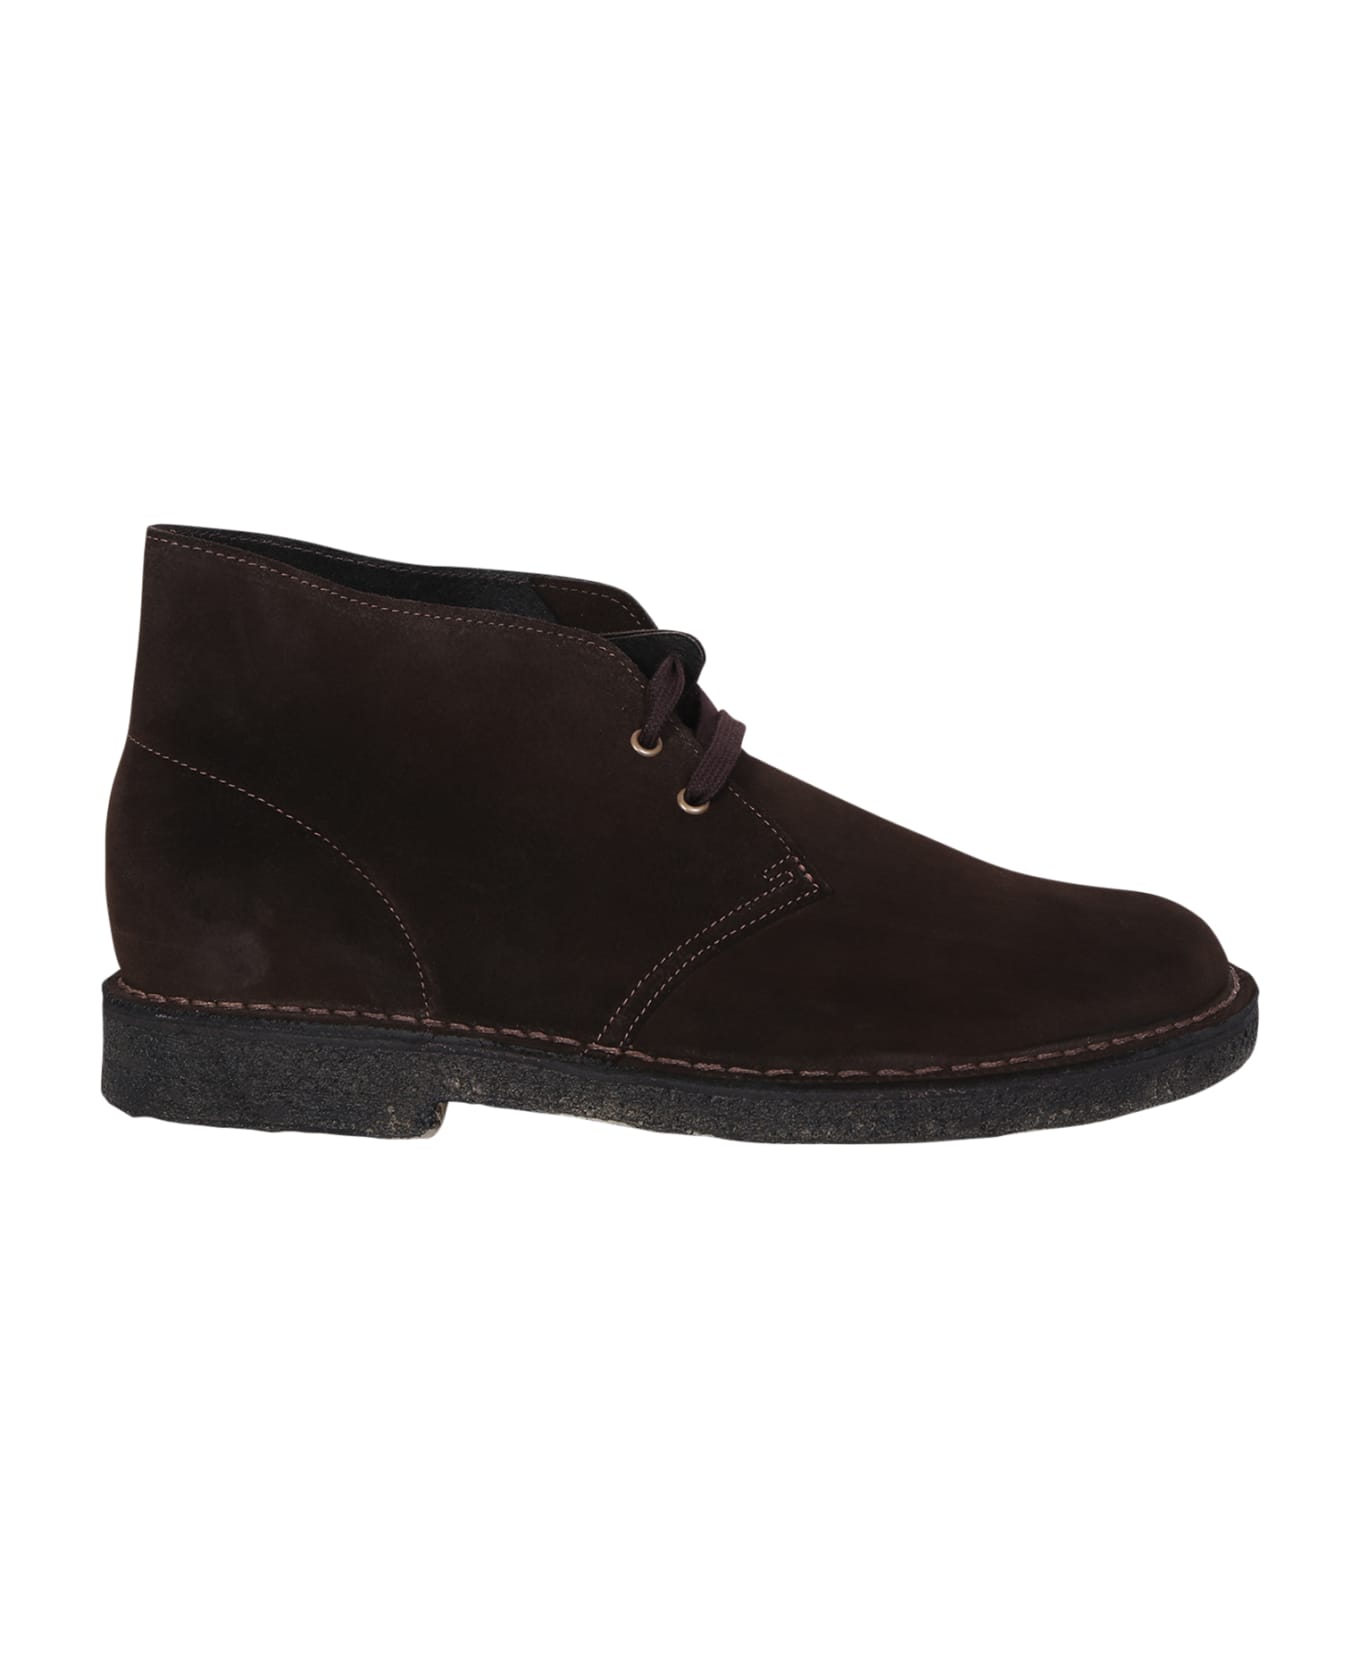 Clarks Boots - Brown